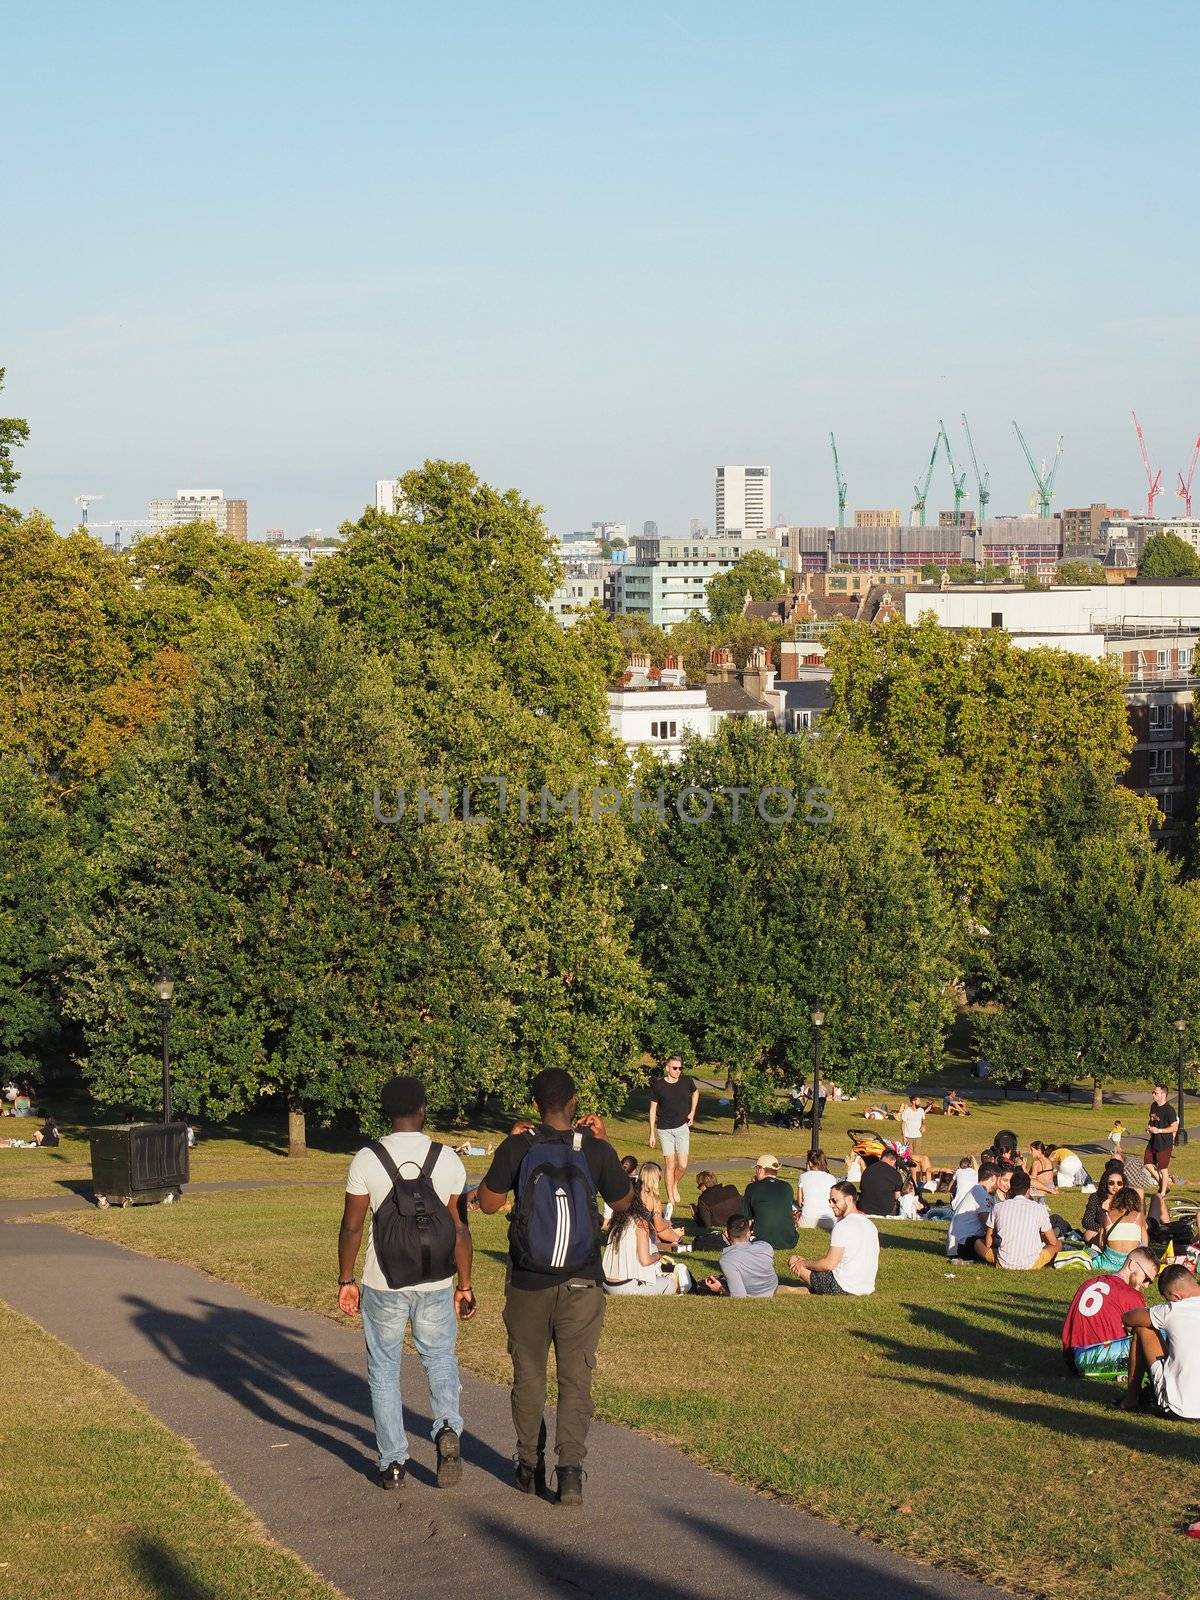 LONDON, UK - CIRCA SEPTEMBER 2019: People at Primrose Hill north of Regent's Park looking at London skyline at sunset